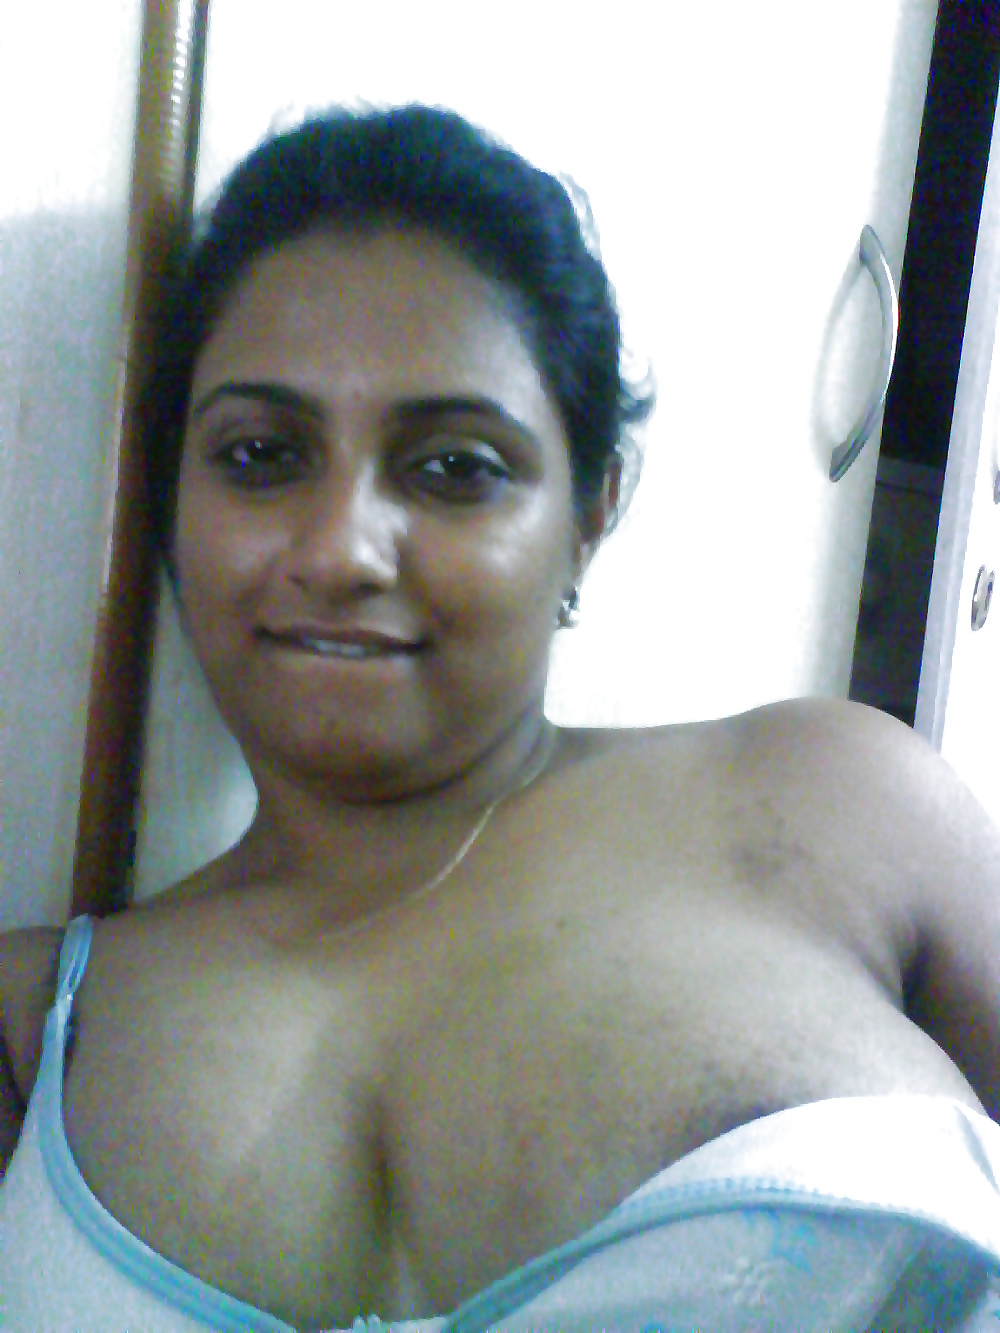 girls showing south boobs Hot indian